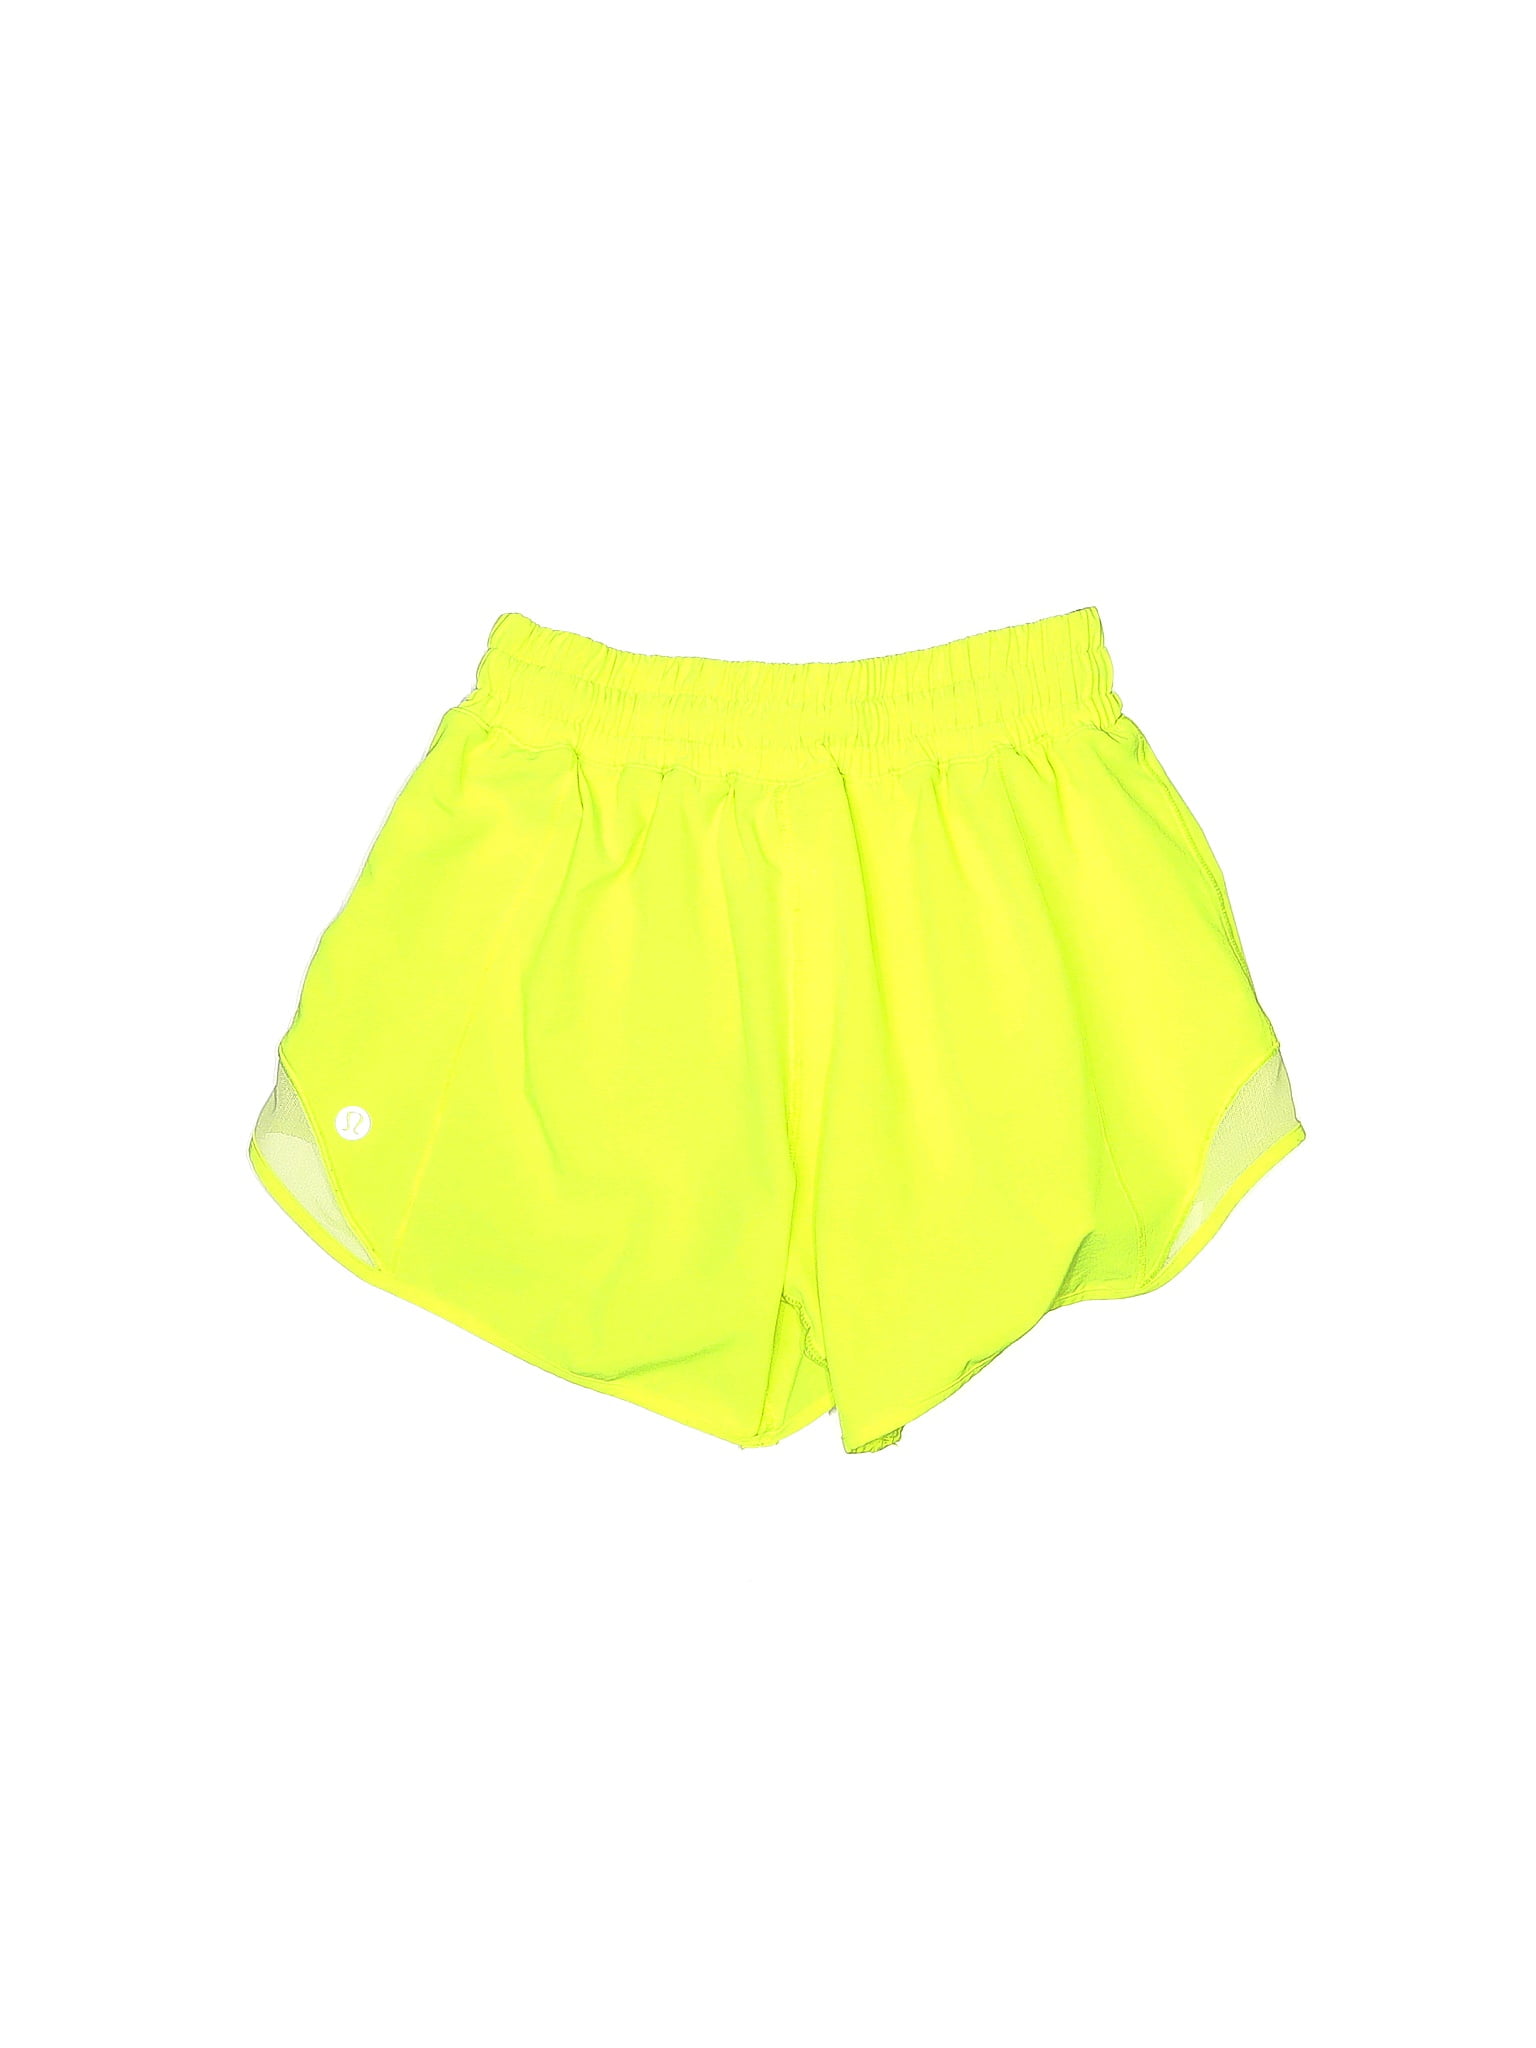 Lululemon Athletica Color Block Solid Yellow Athletic Shorts Size 2 (Tall)  - 38% off